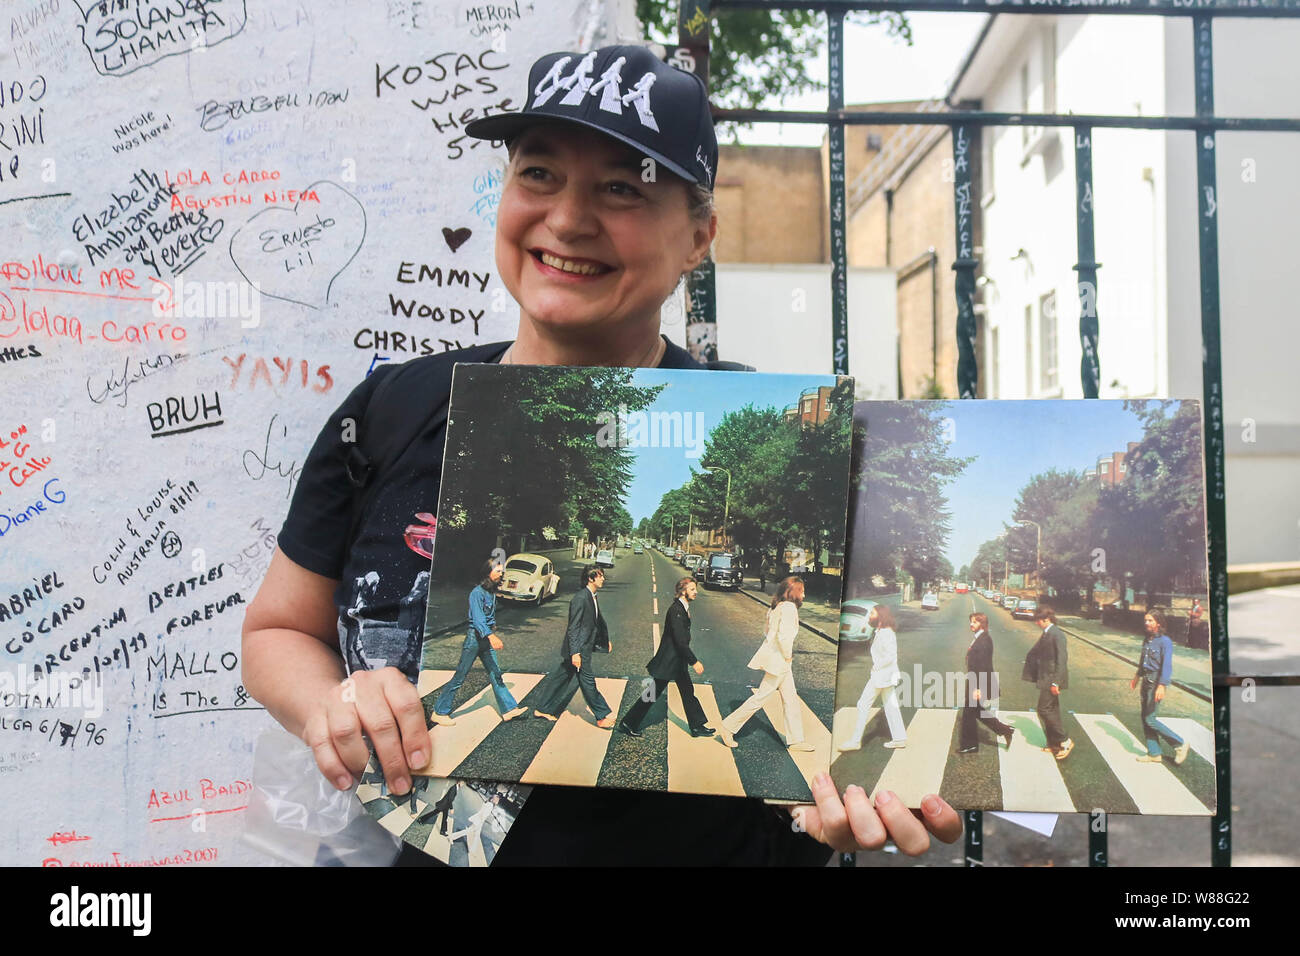 London UK. 8th August 2019. Beatles fans celebrate the  50th anniversary of the Abbey Road album released on 8 August 1969.Credit: amer ghazzal/Alamy Live News Stock Photo